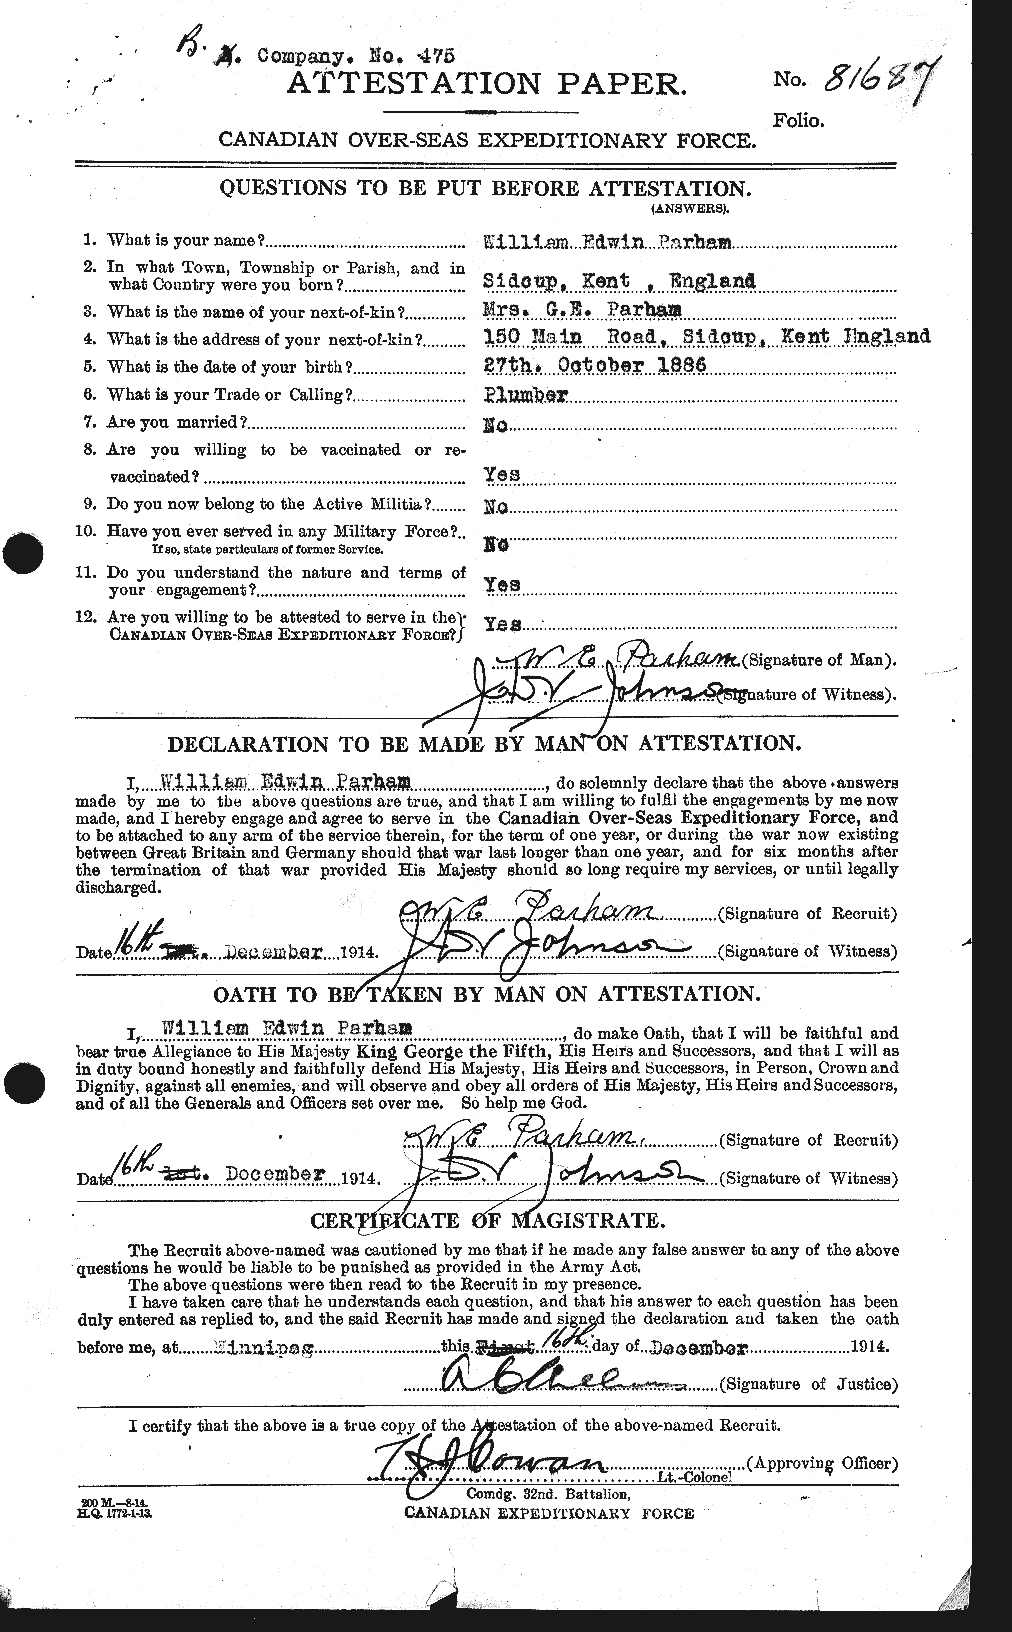 Personnel Records of the First World War - CEF 564571a